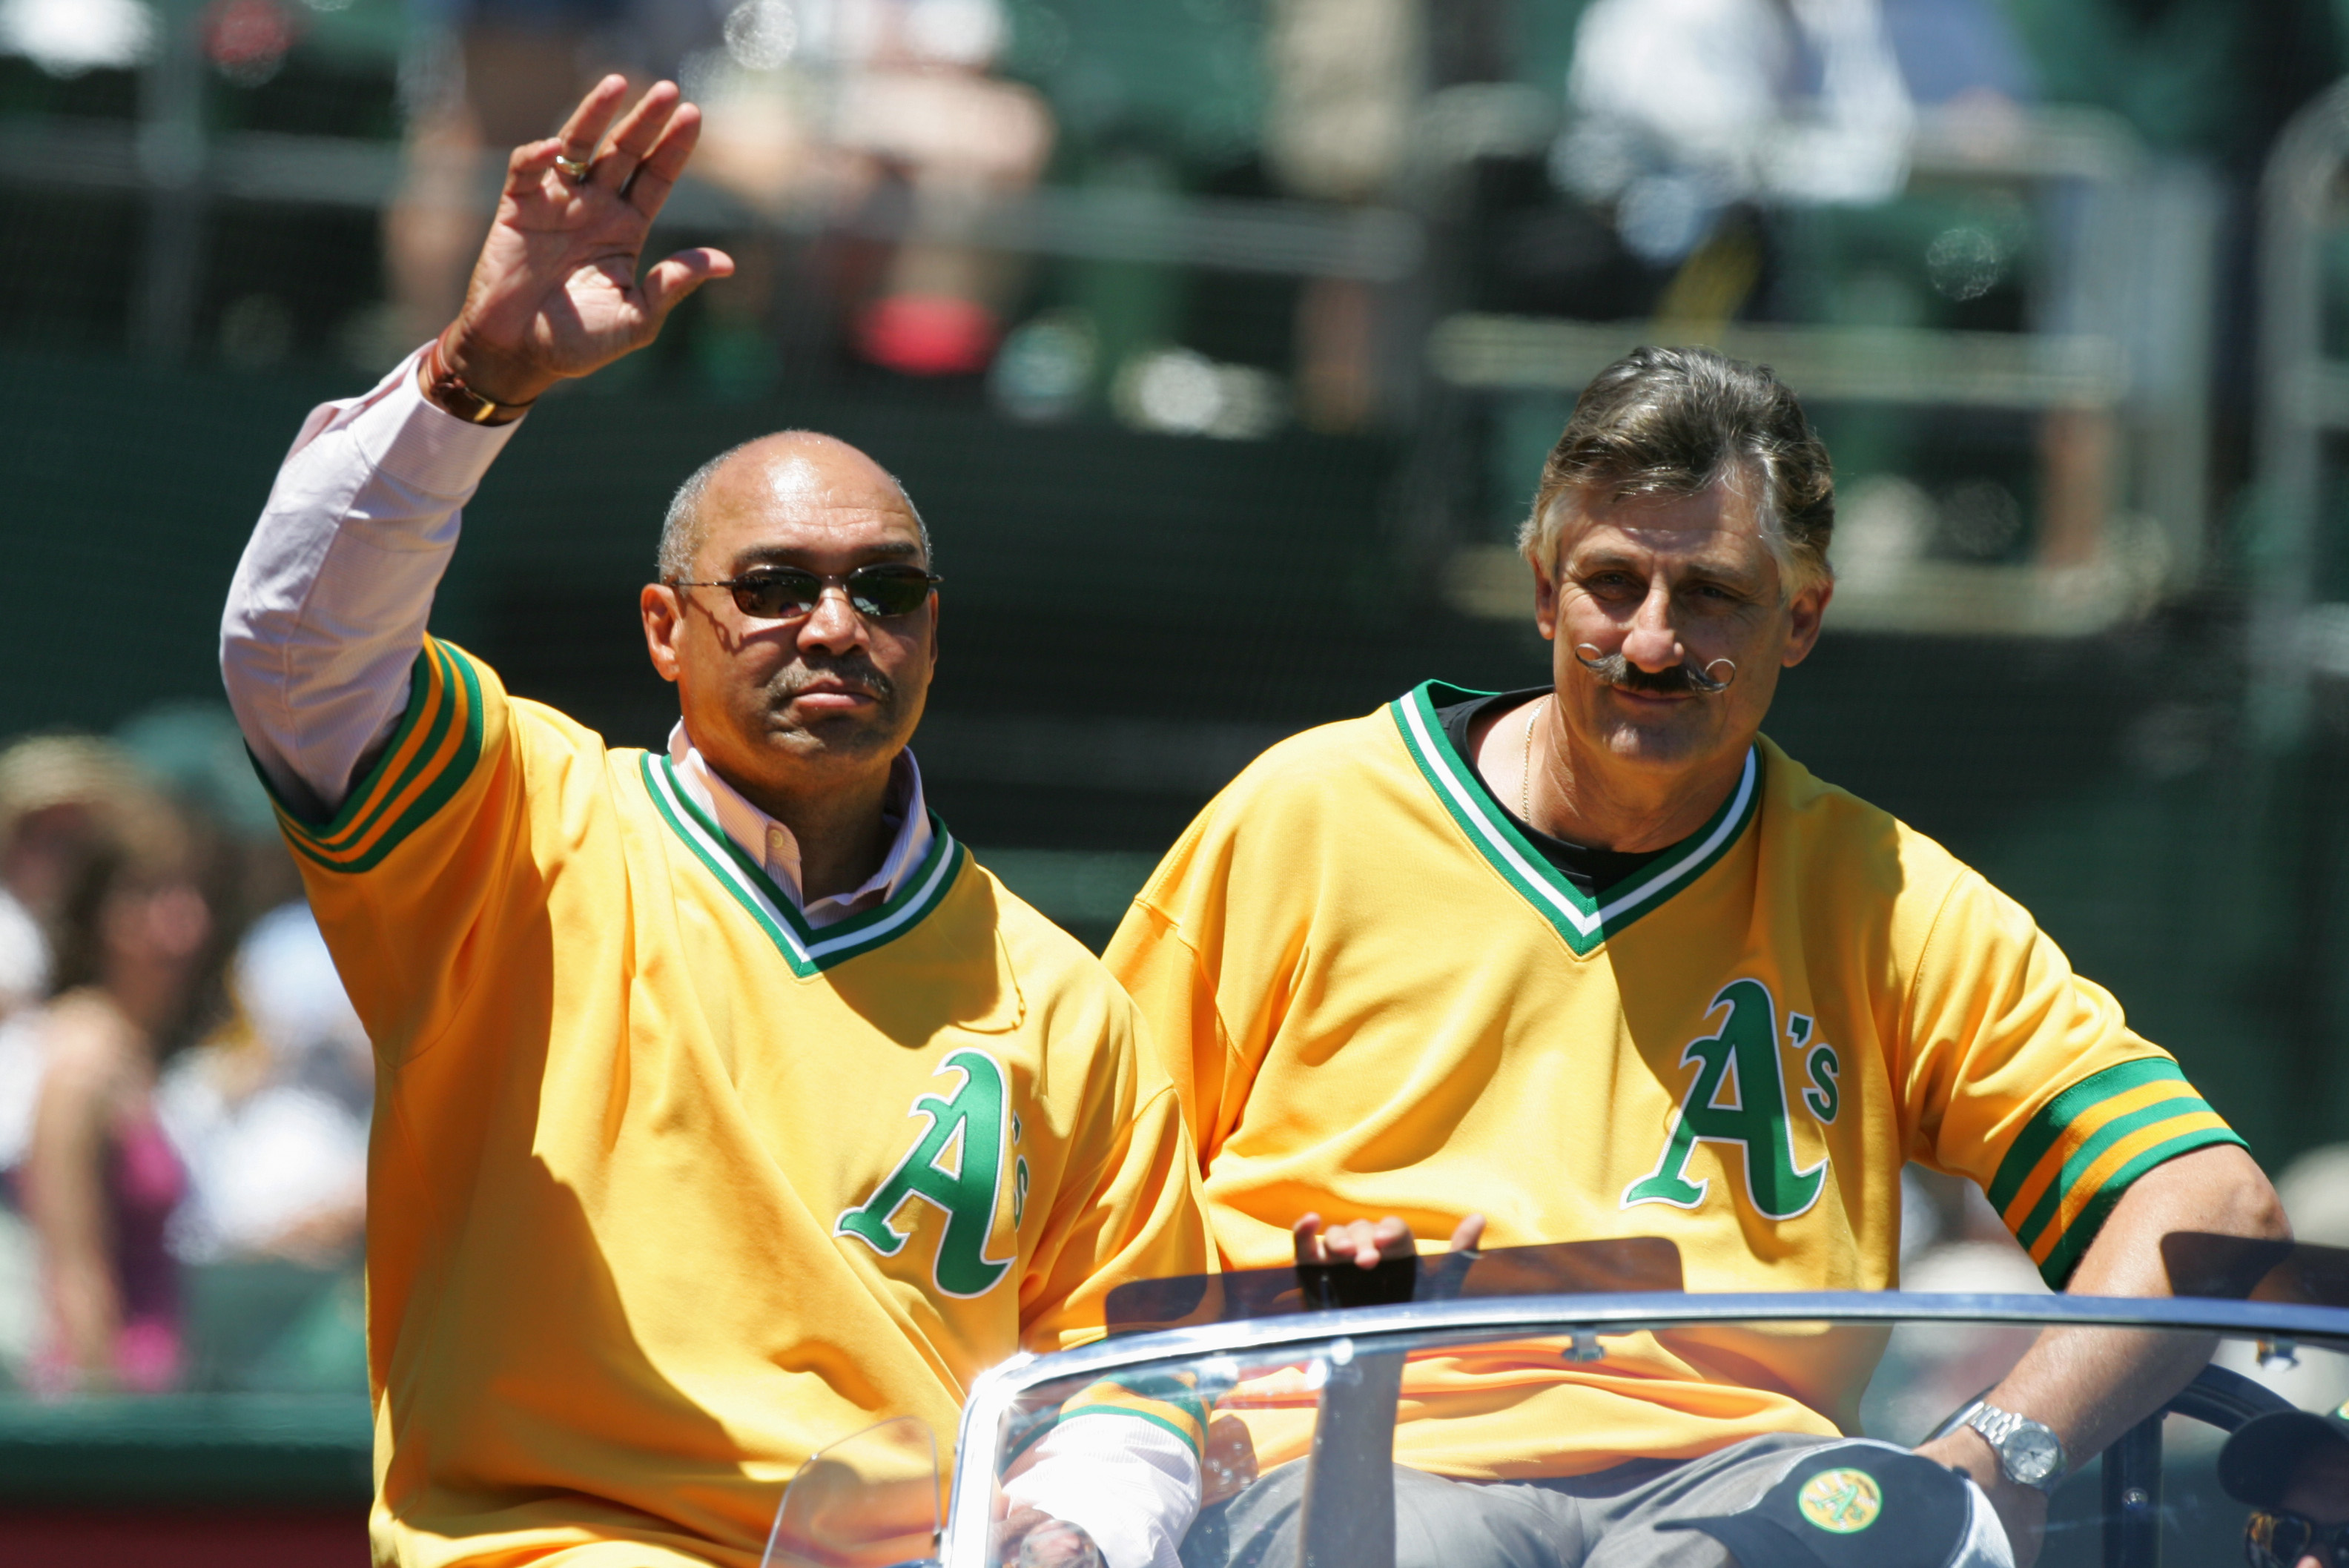 Reggie Jackson waves during a celebration of the Oakland Athletics' 1972  World Series winning team before a baseball game between the Athletics and  the Boston Red Sox in Oakland, Calif., Saturday, June